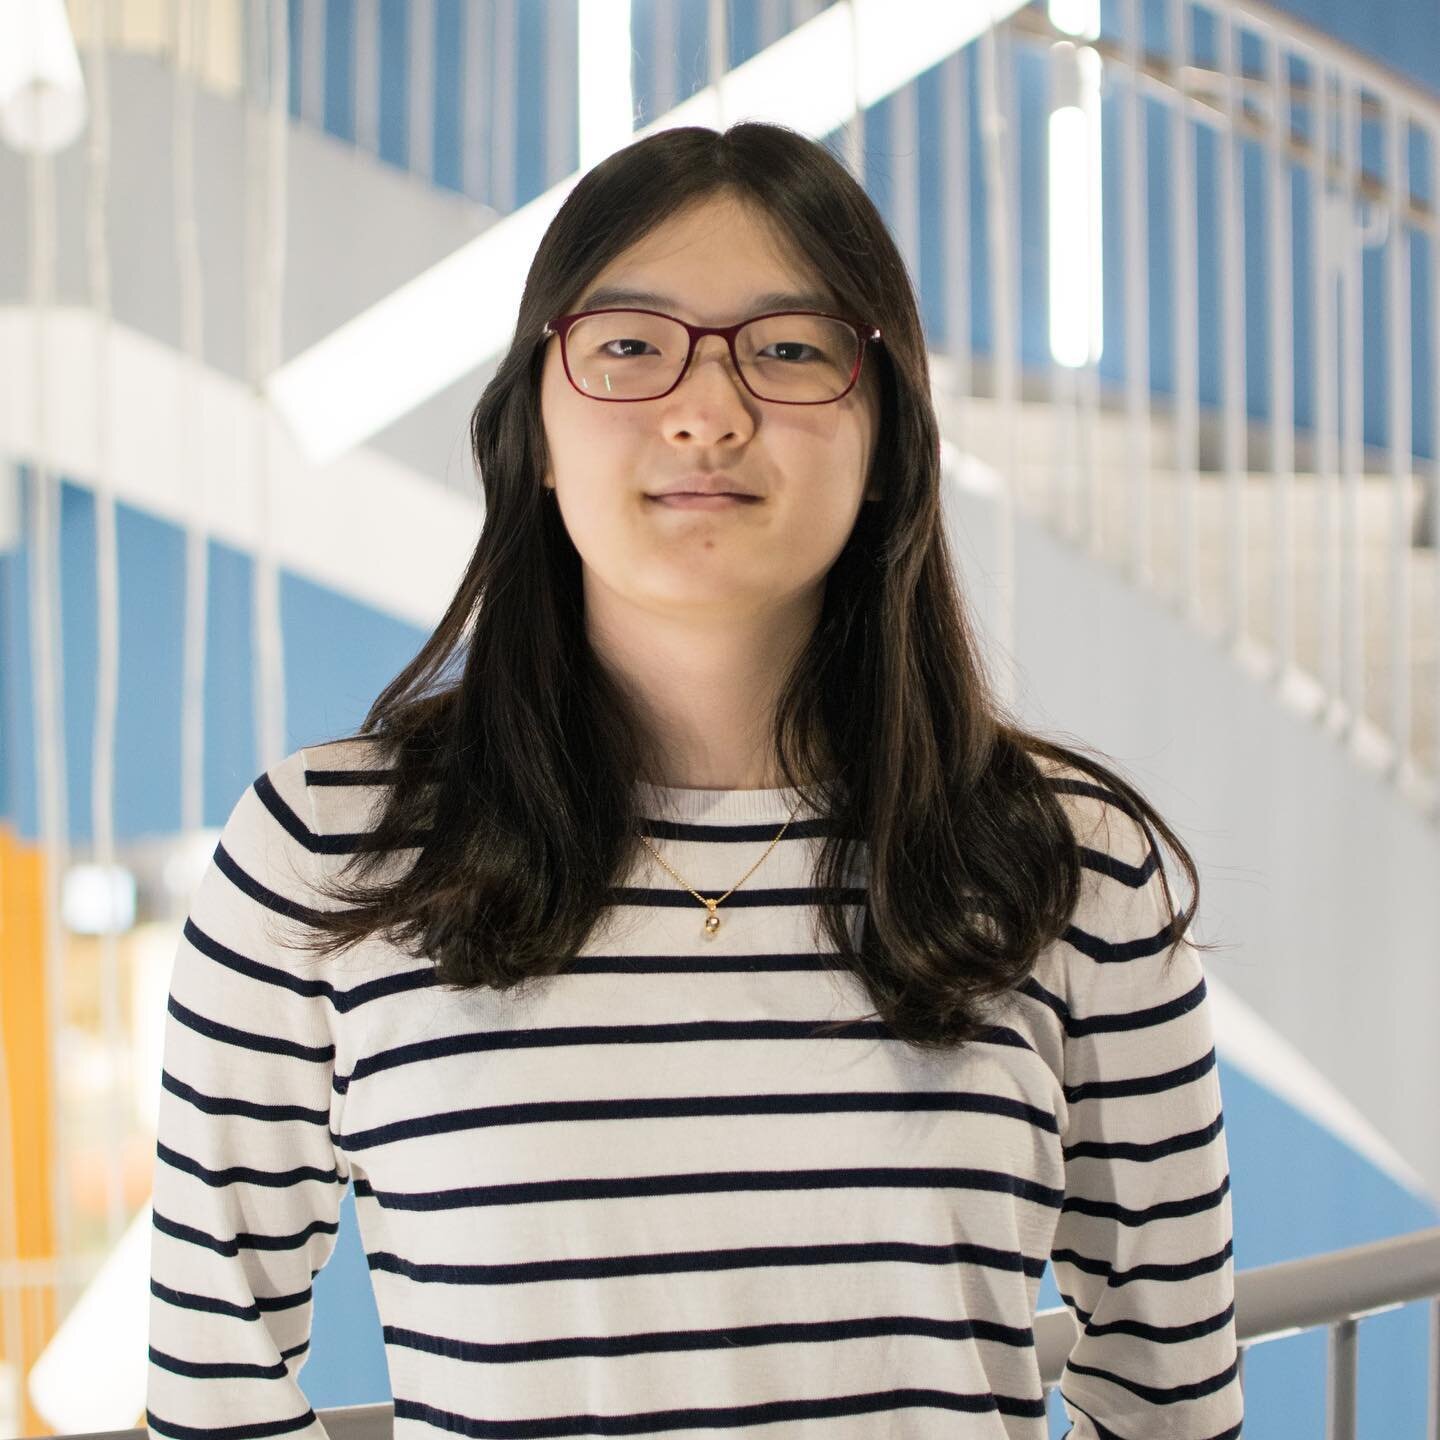 What are you doing to make a difference? 
Meet Juyoung Kim, project manager. Change++ has developed two directory applications for Vanderbilt&rsquo;s Peabody Coalition of Black Graduates (PCBG) and the Latino and Latina Studies Department. While both